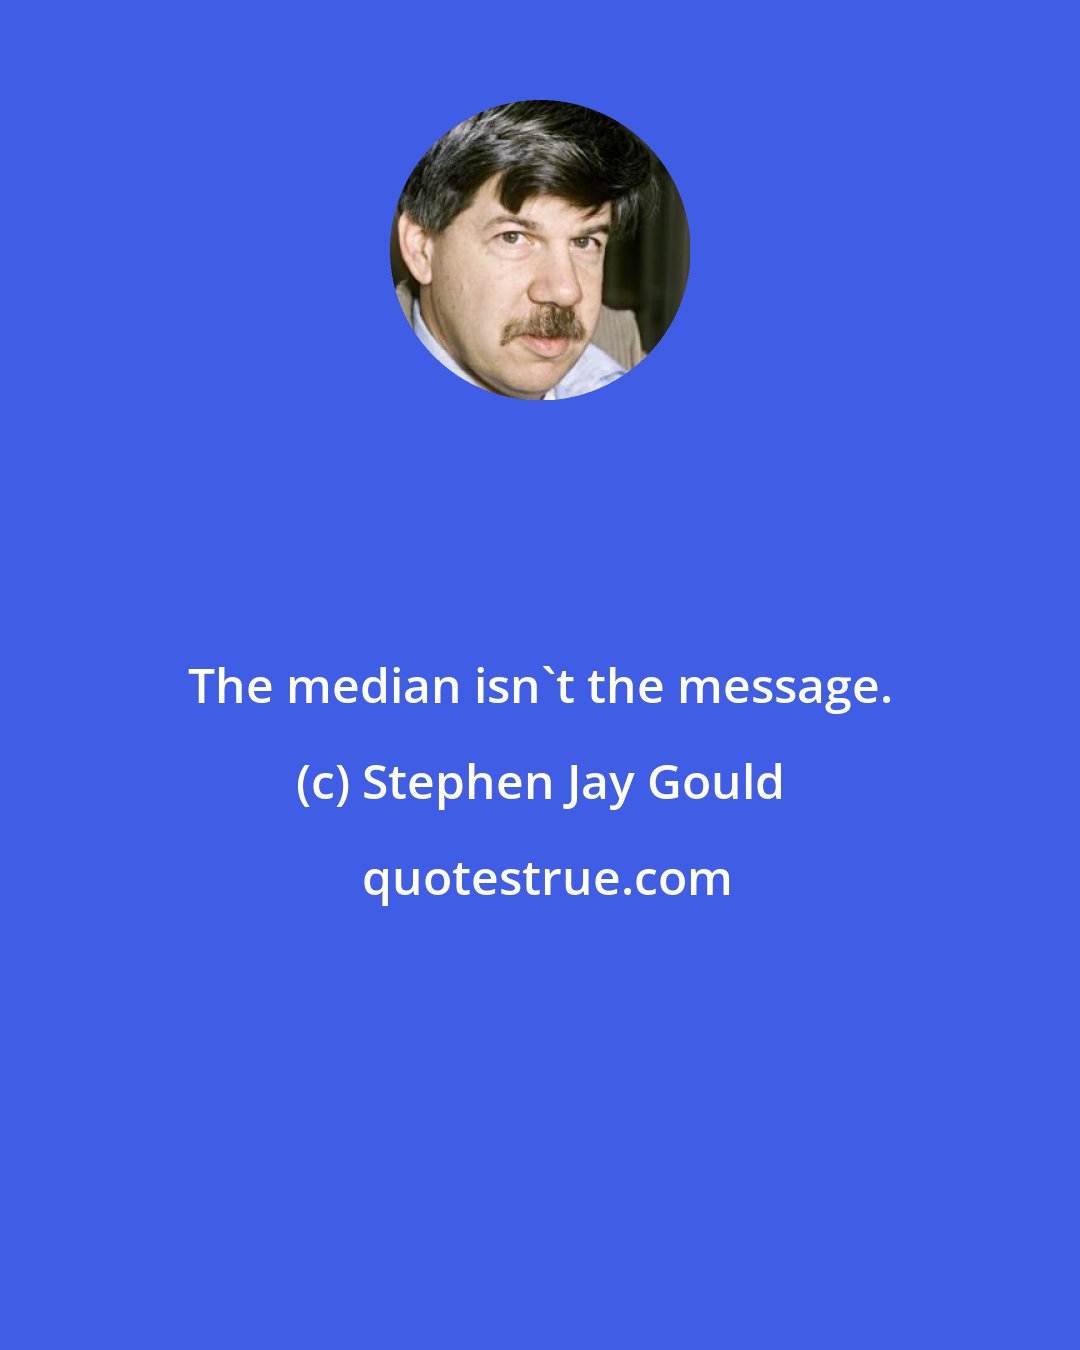 Stephen Jay Gould: The median isn't the message.